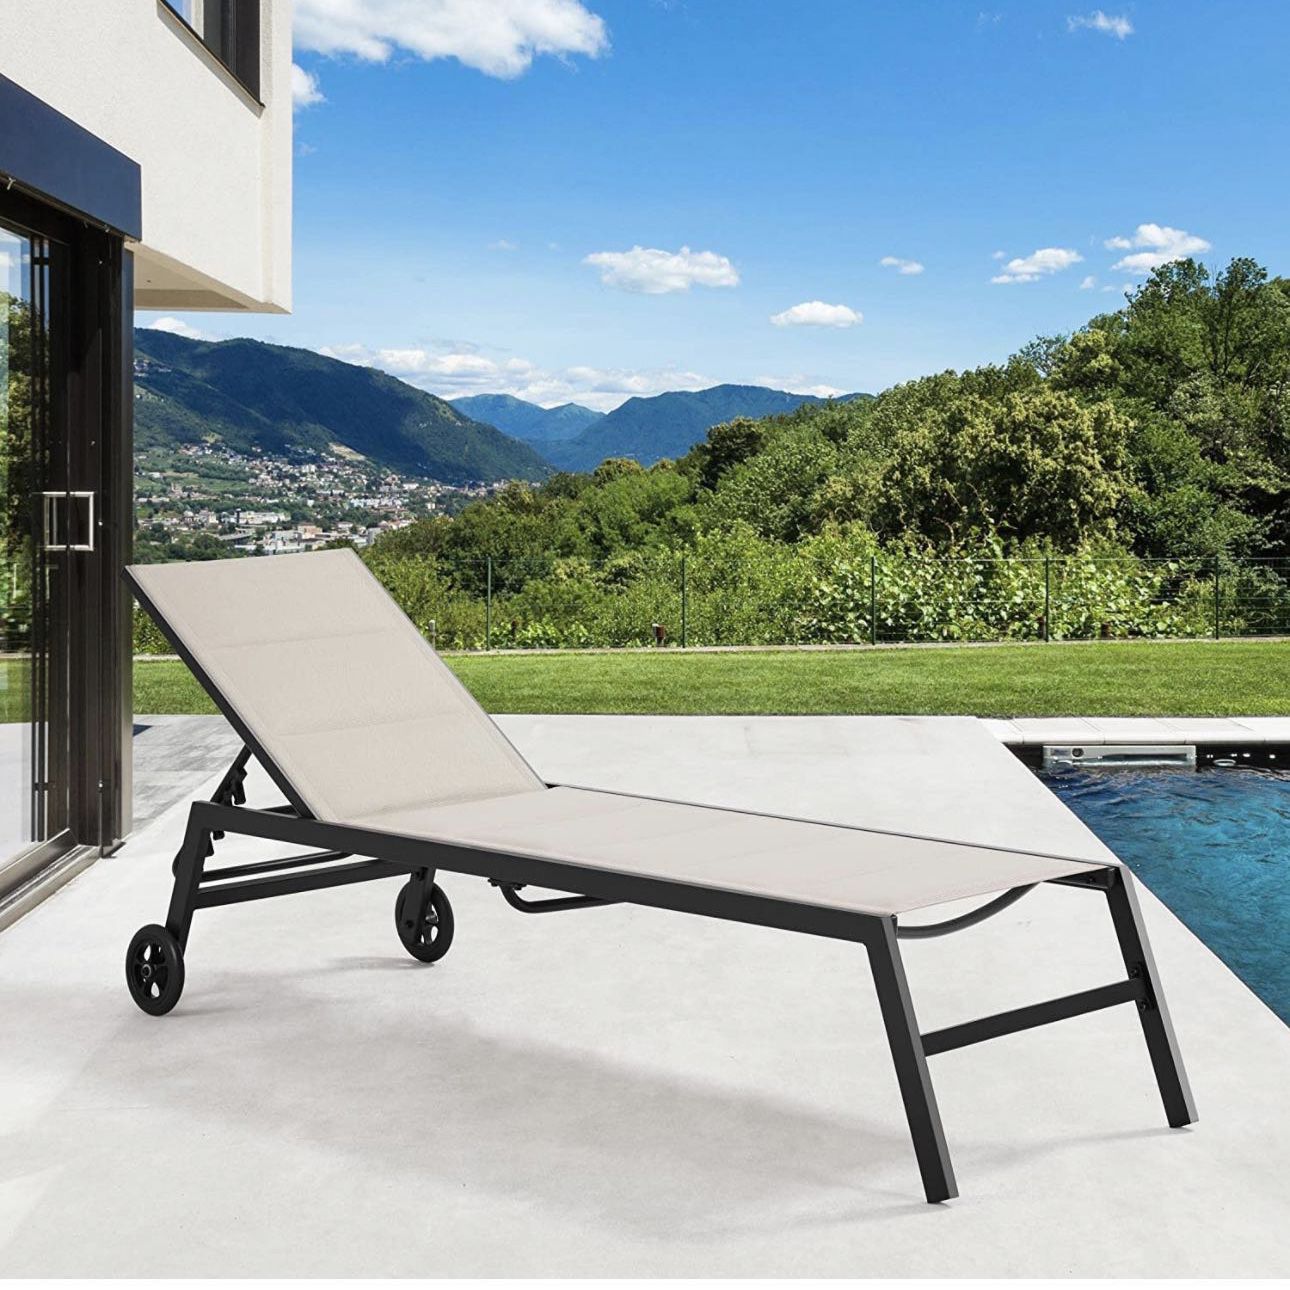 Outdoor Patio Chaise Lounge, All Weather Outdoor Lounge with Wheels, 5-Position Adjustable Recliner for Patio, Pool, Beach & Yard, Beige 612442